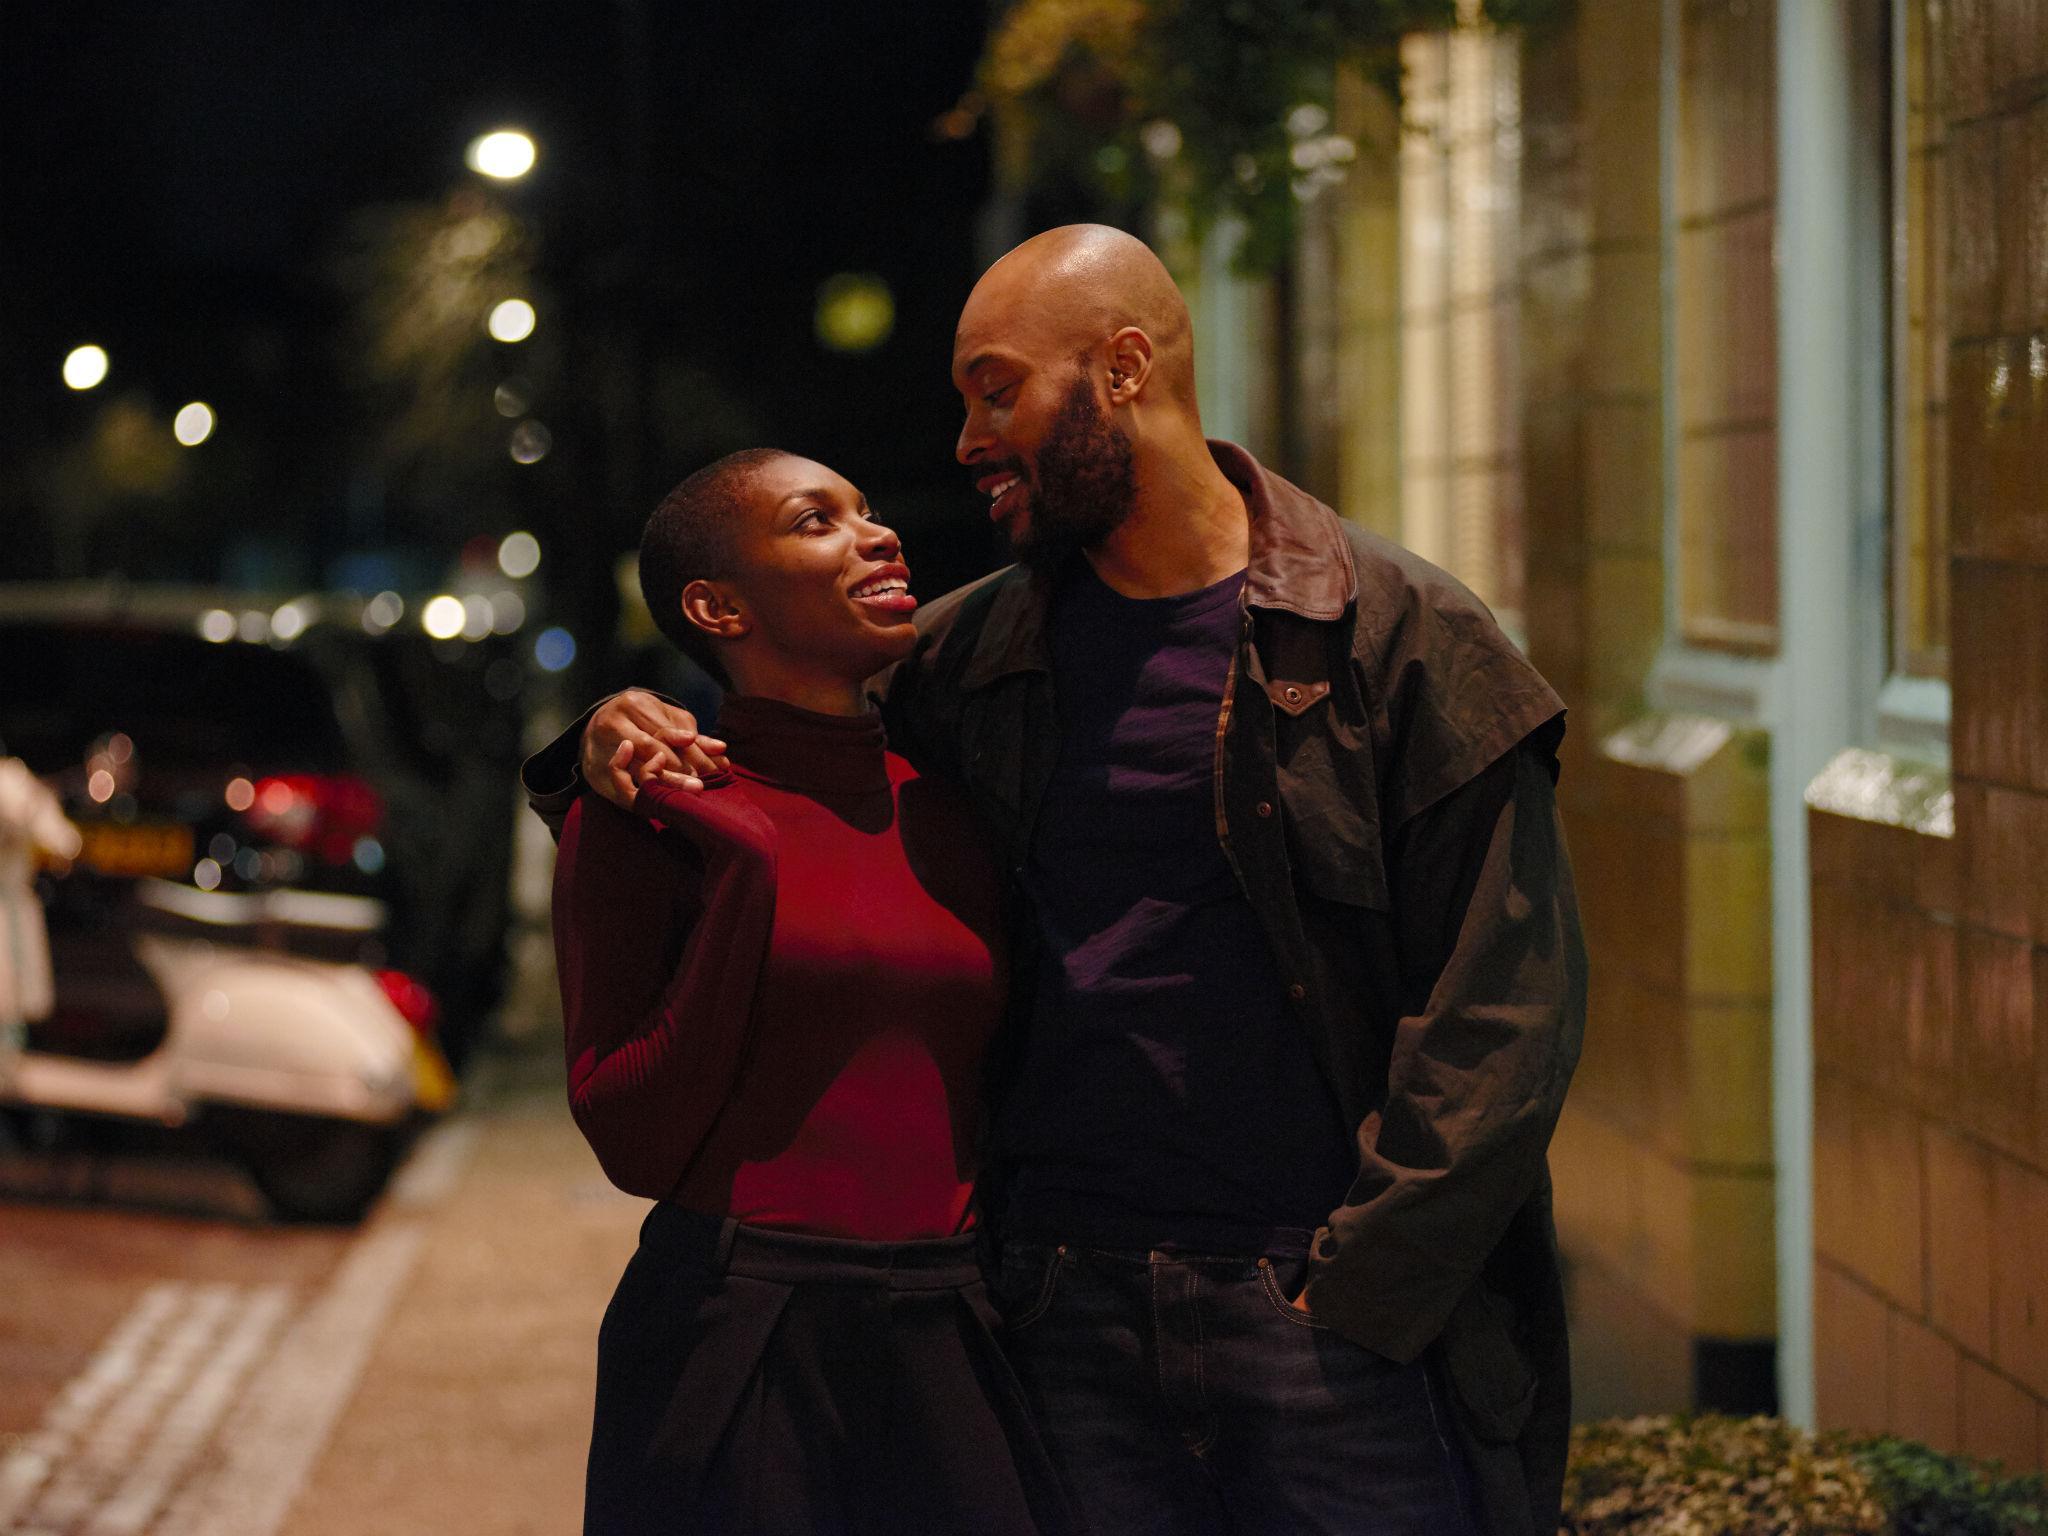 Michaela Coel and Arinze Kene convince us of the intensity and sincerity of their feelings